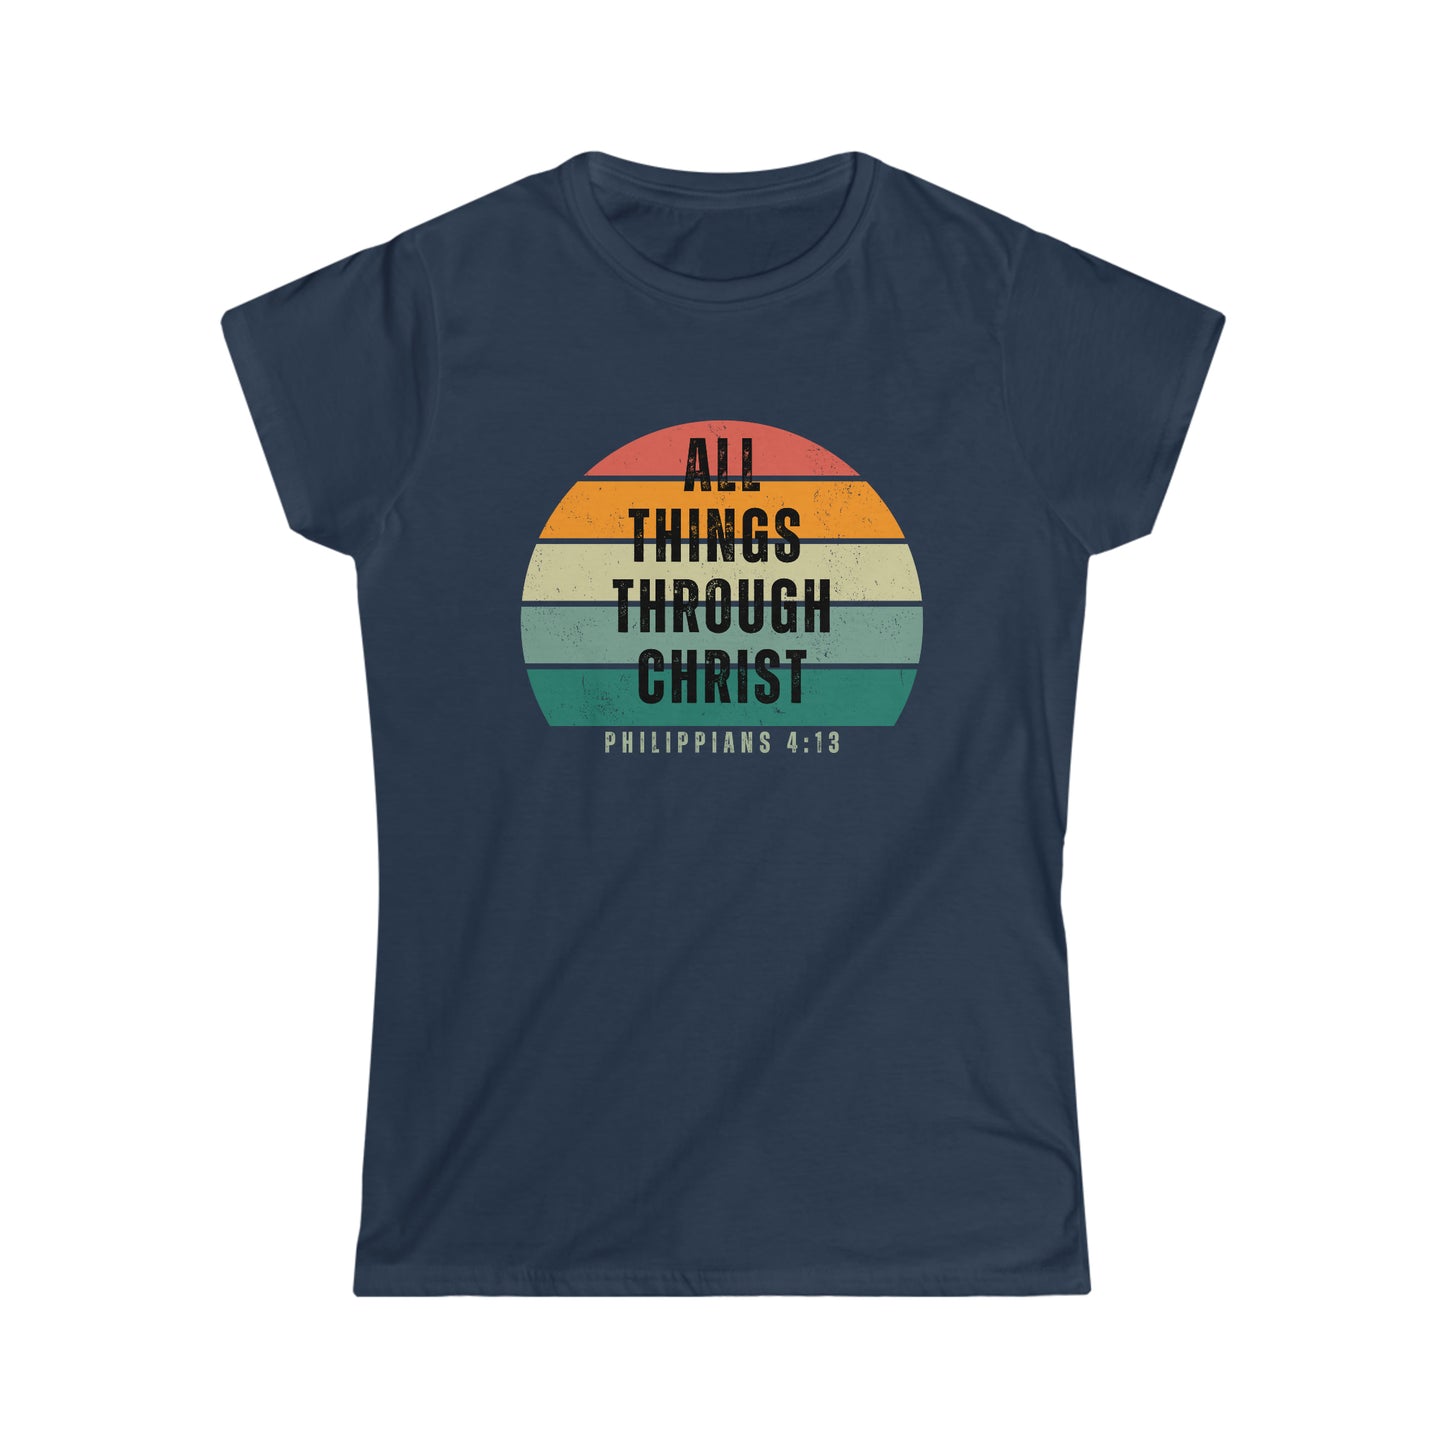 Women's Softstyle Tee, All Things Through Christ T-Shirt, I Can Do All Things Through Christ, Philippians 4:13, Religious Gift, Christian Apparel, Christian Tshirt, LDS Girls Camp Shirt